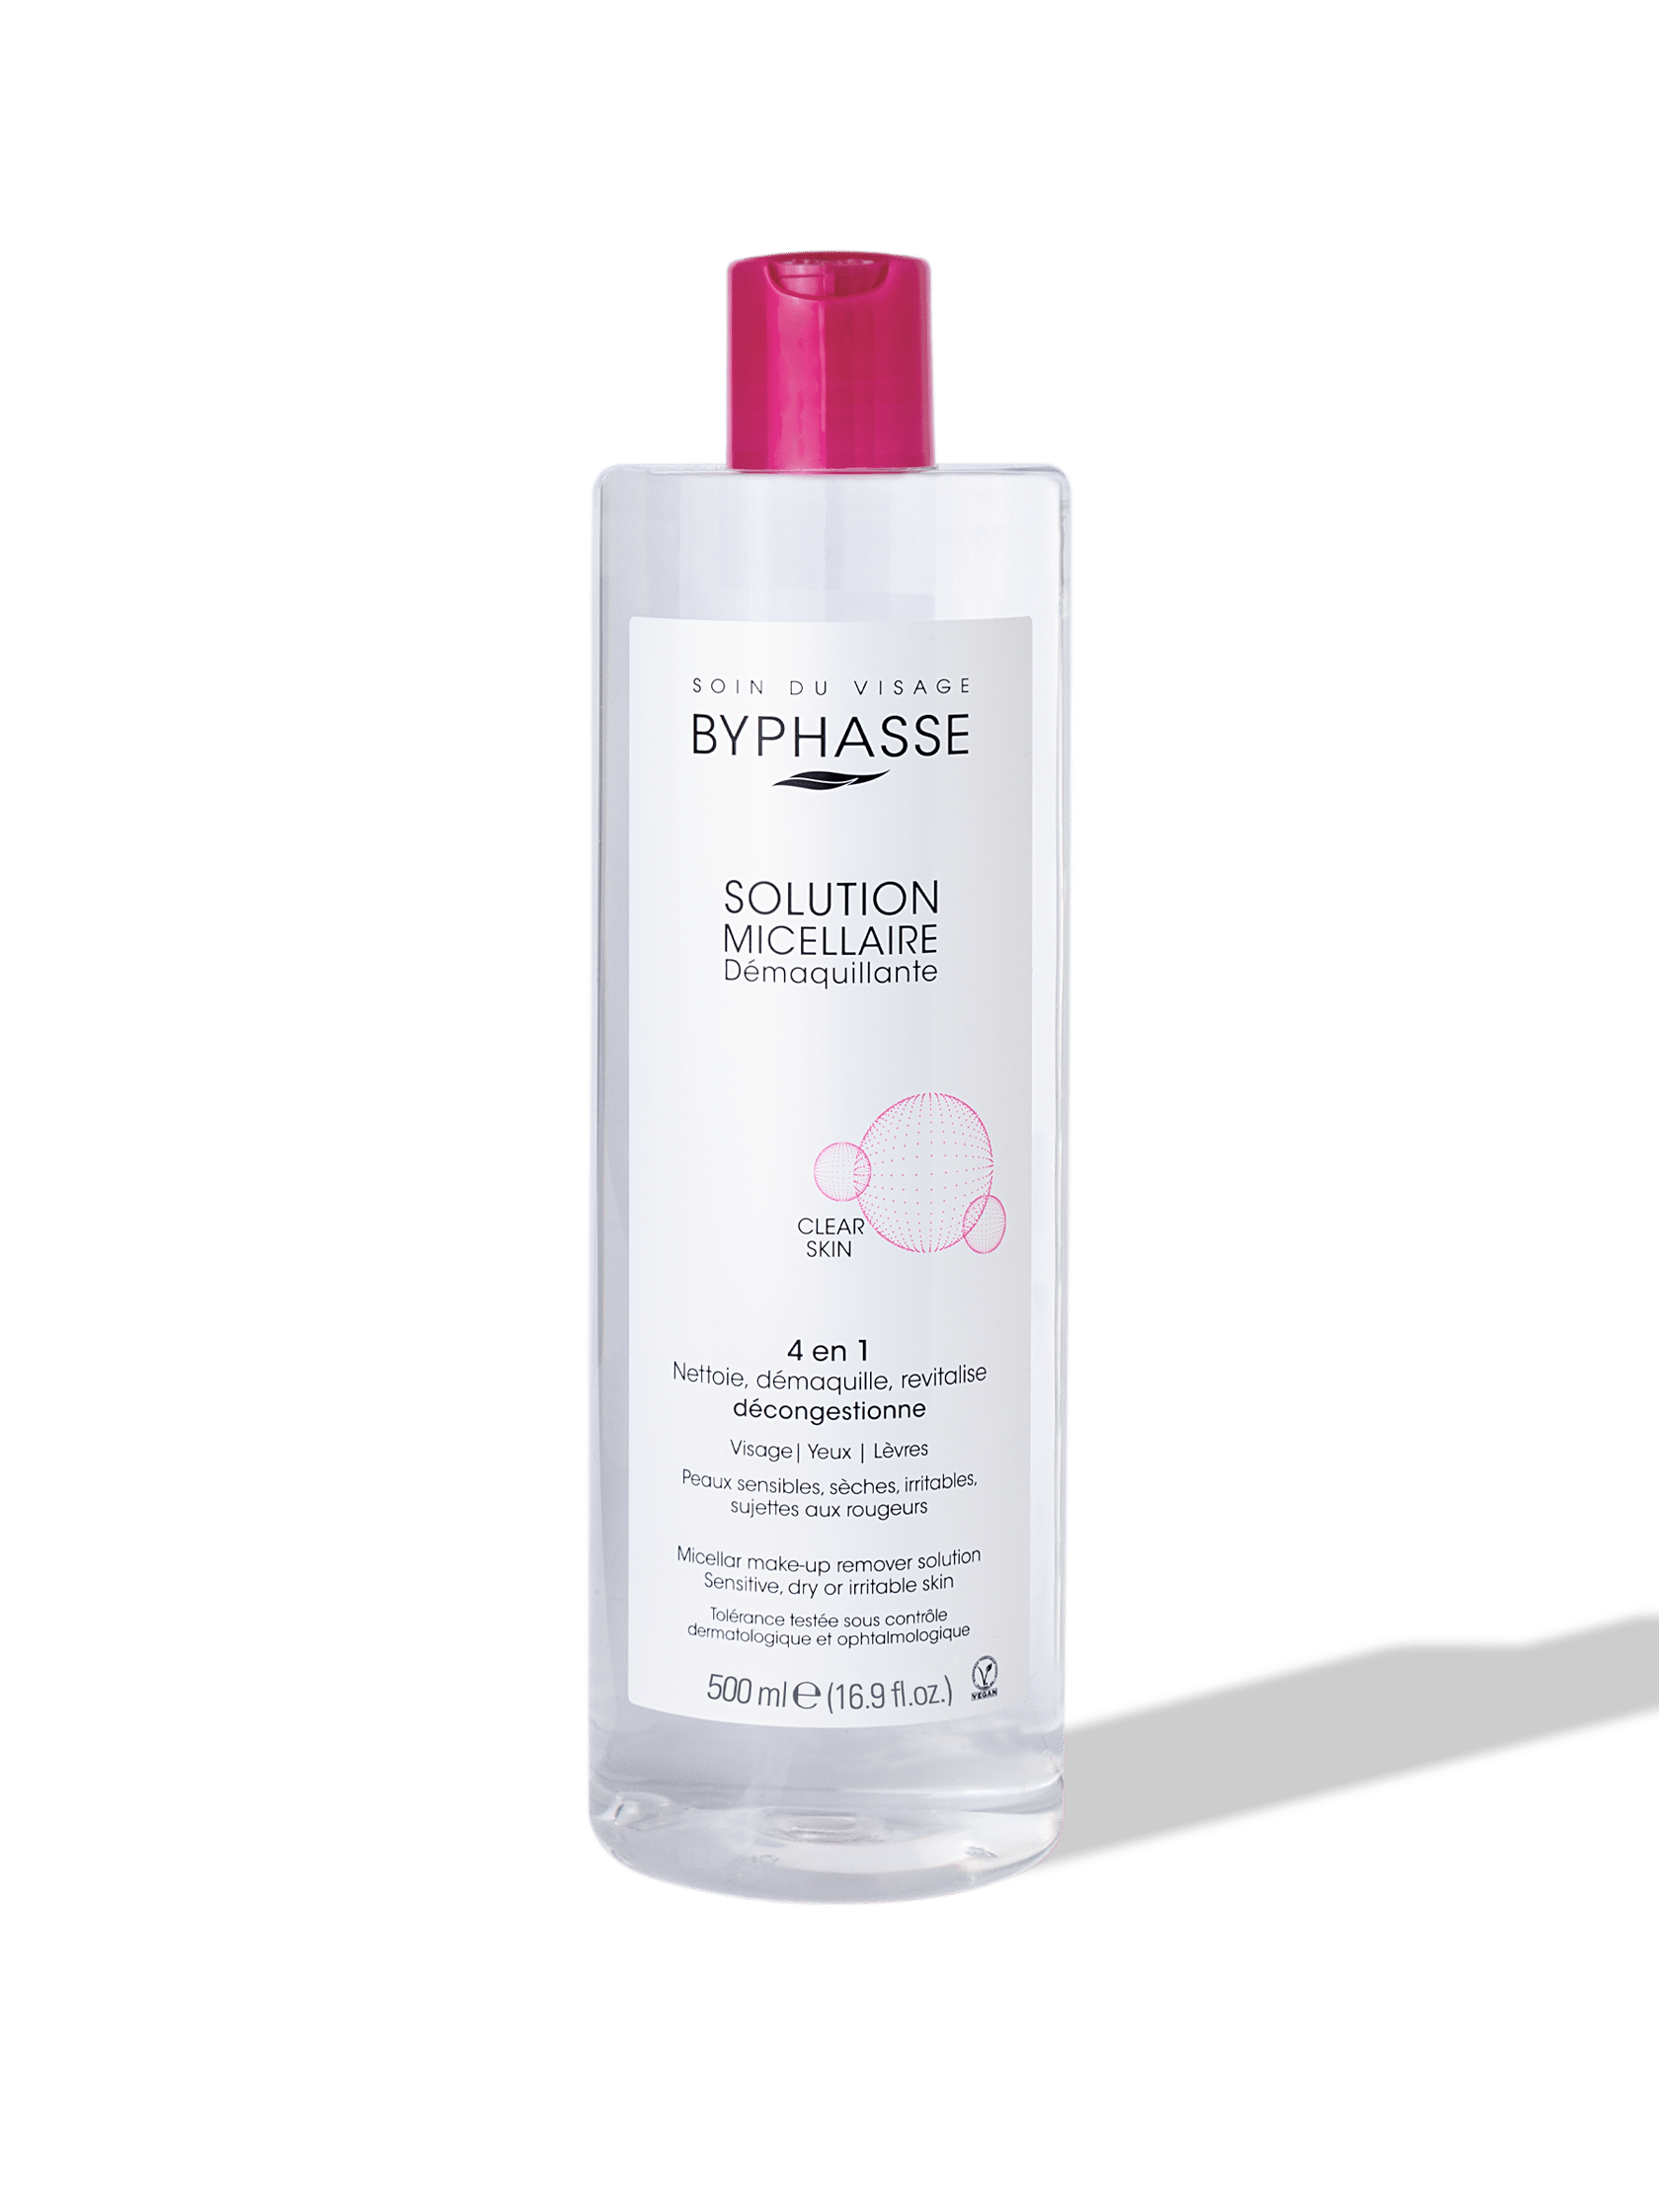 SOLUTION MICELLAIRE DÉMAQUILLANTE 500ML product_image